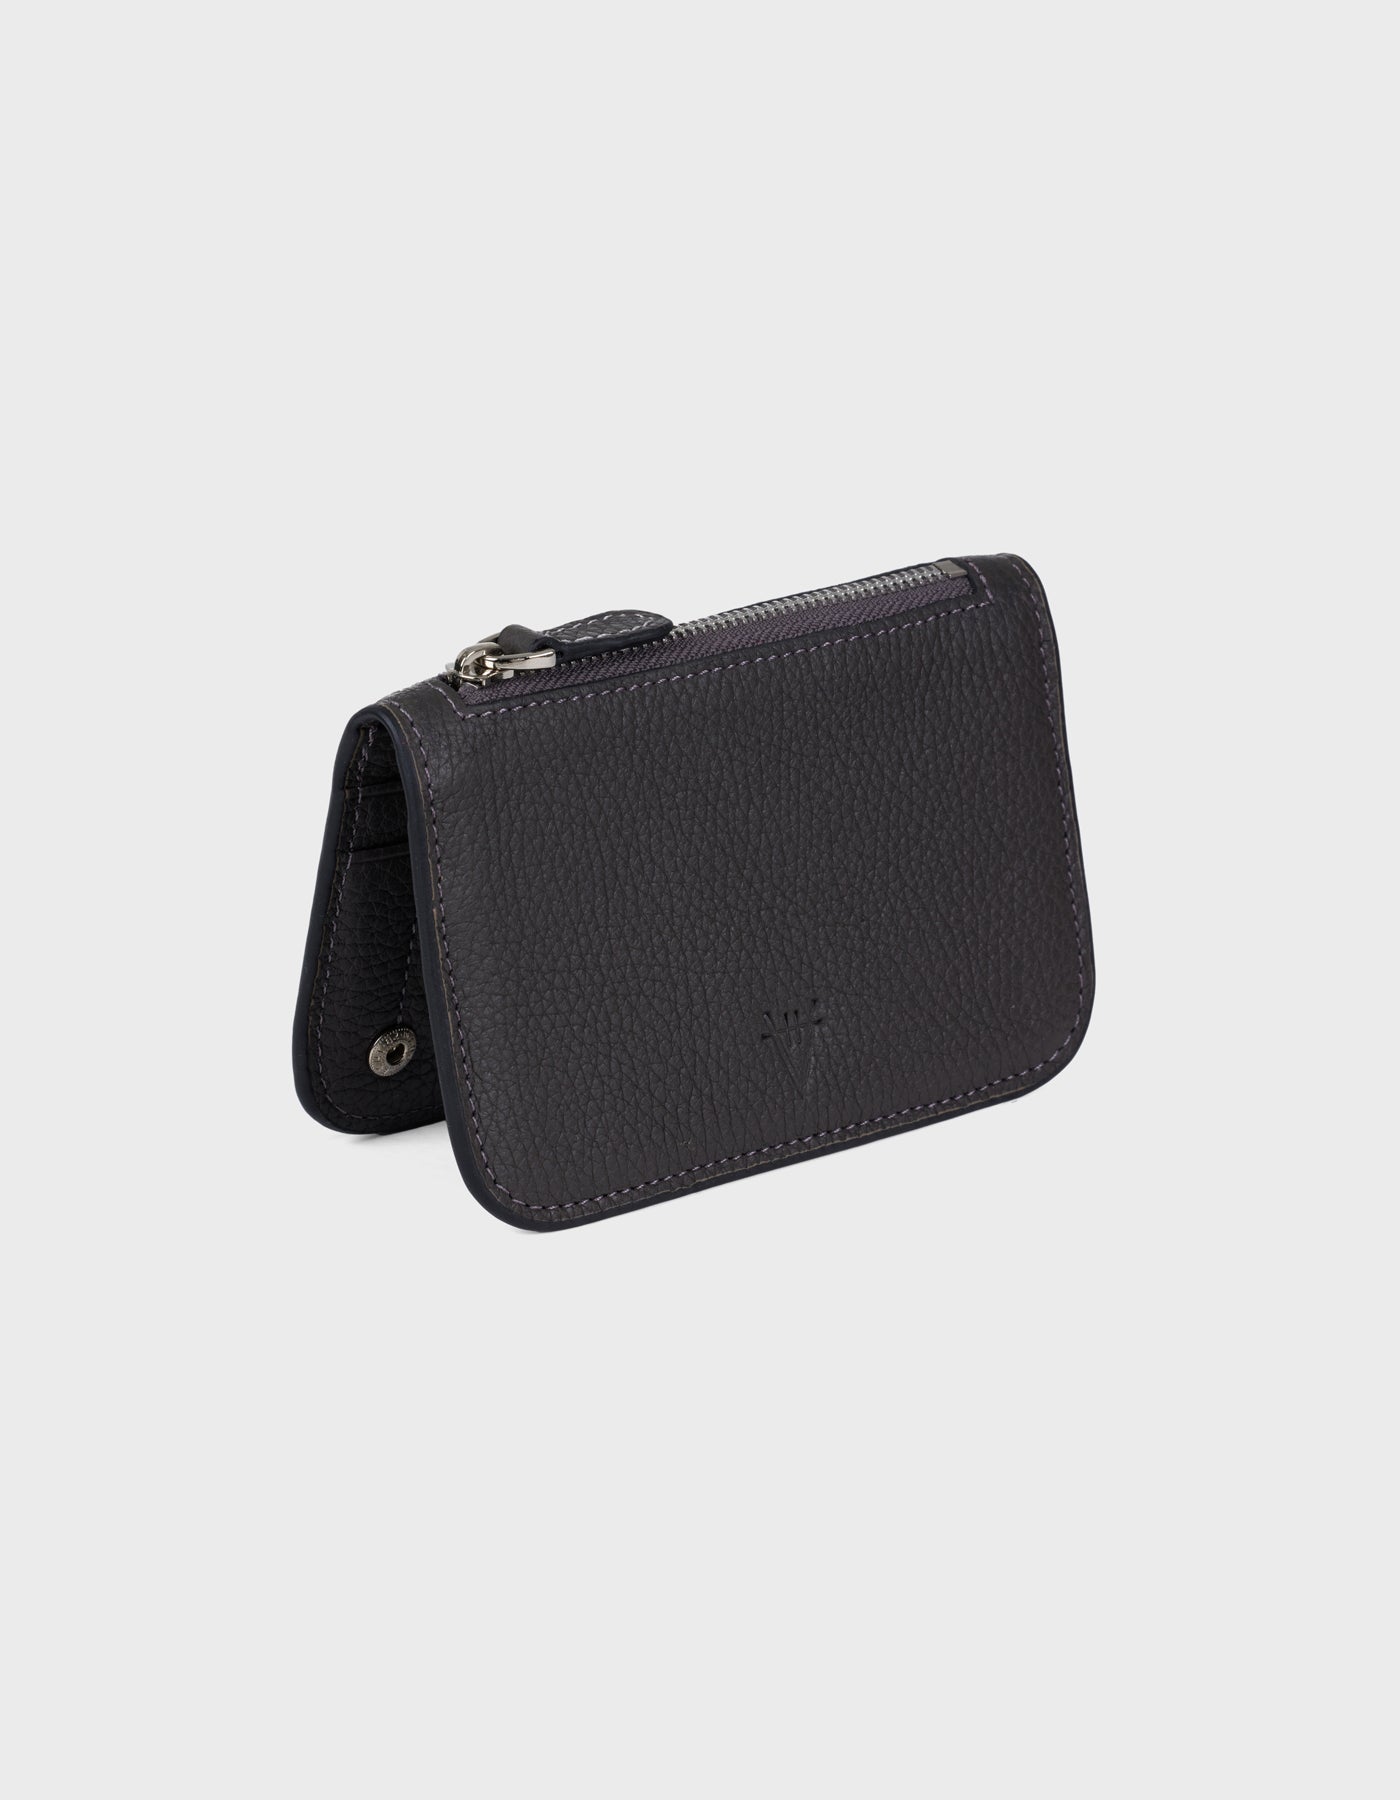 Hiva Atelier | Alae Coin Purse & Card Holder Anthracite | Beautiful and Versatile